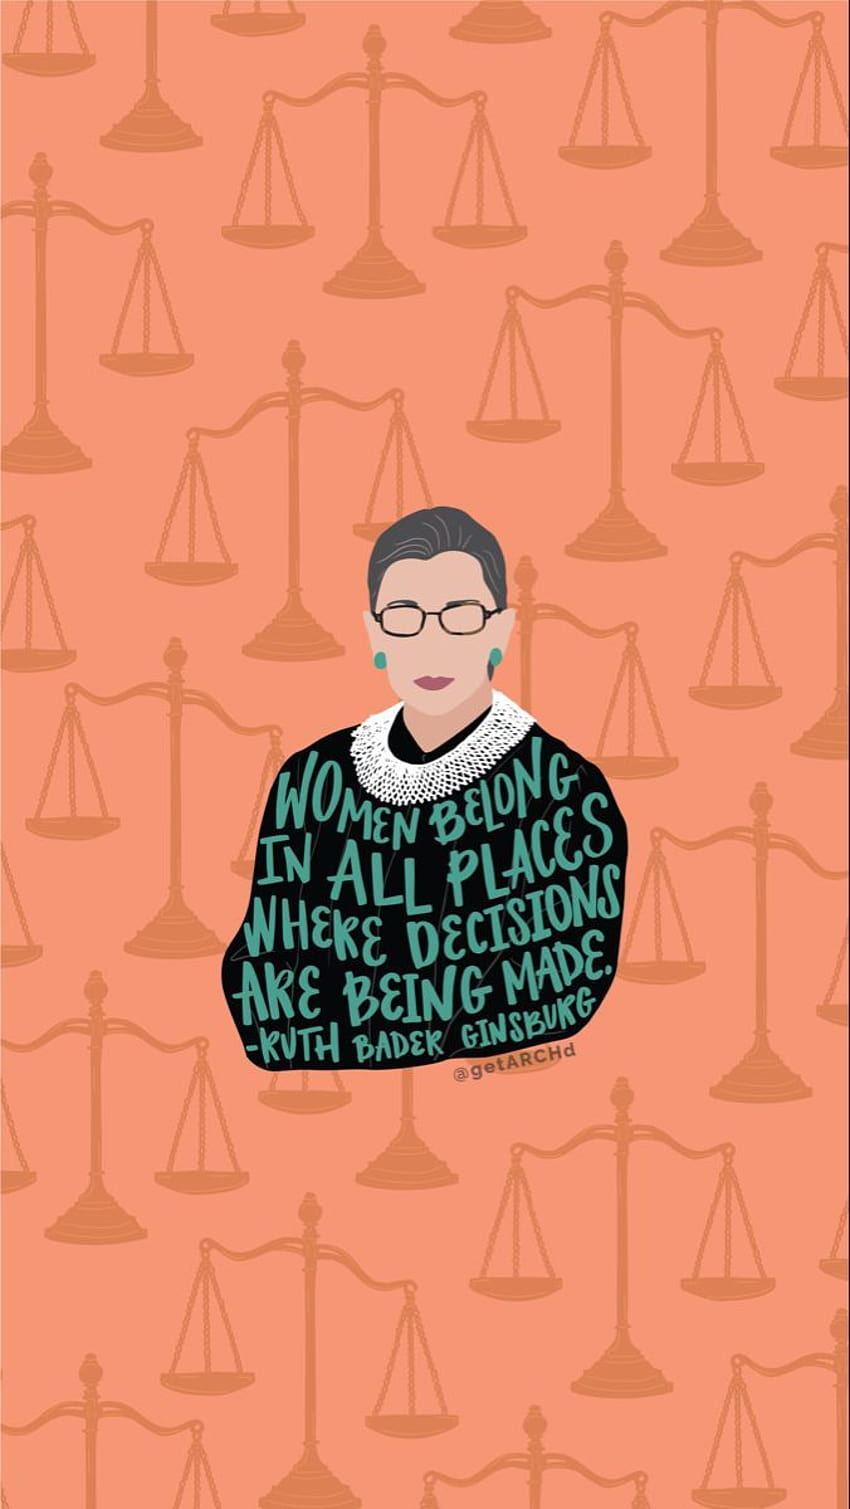 Ruth Bader Ginsburg quote Women belong in all places where HD phone wallpaper